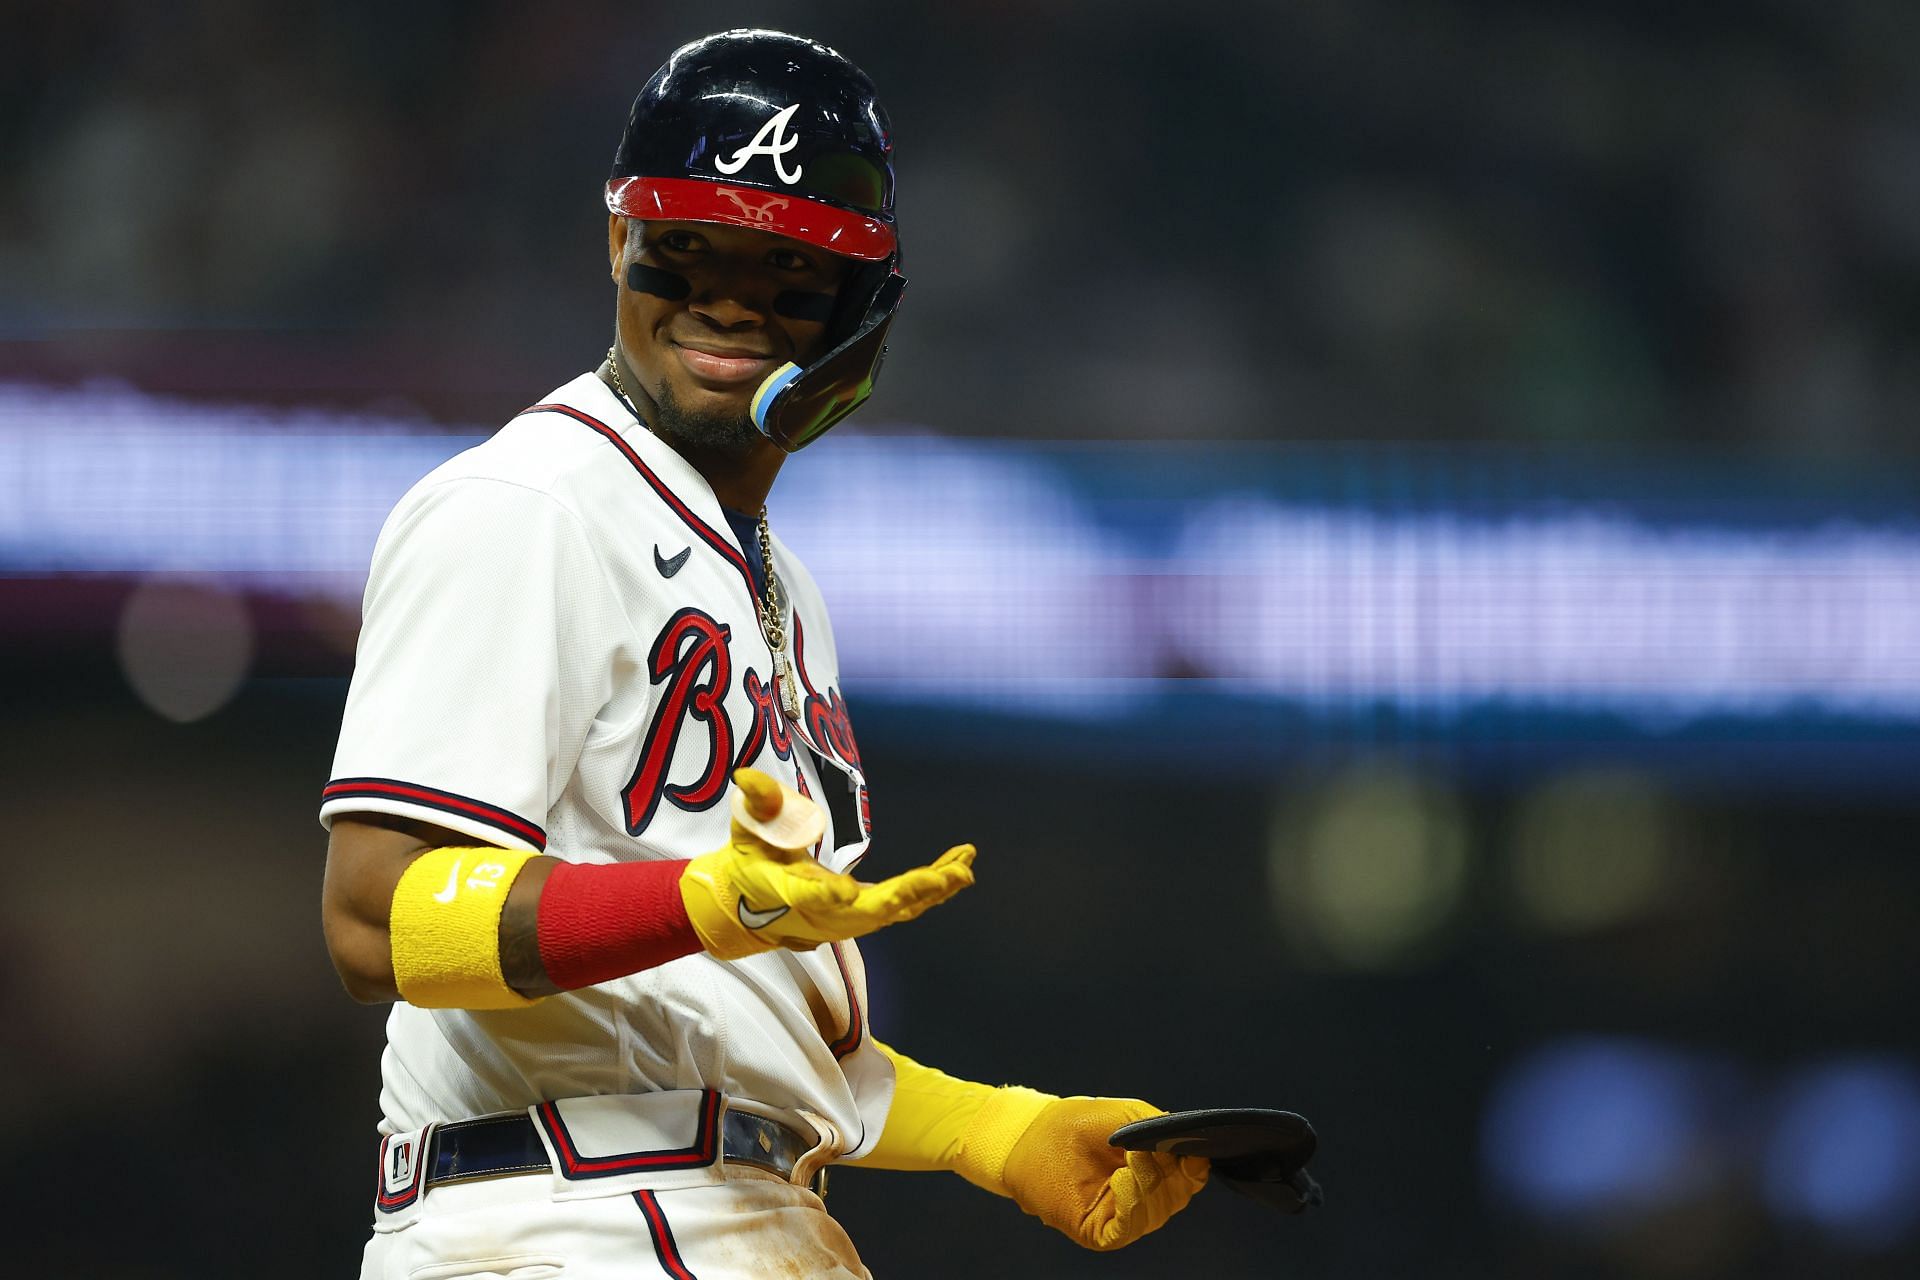 Atlanta Braves OF Ronald Acuna Jr. is back and ready to take charge of the National League